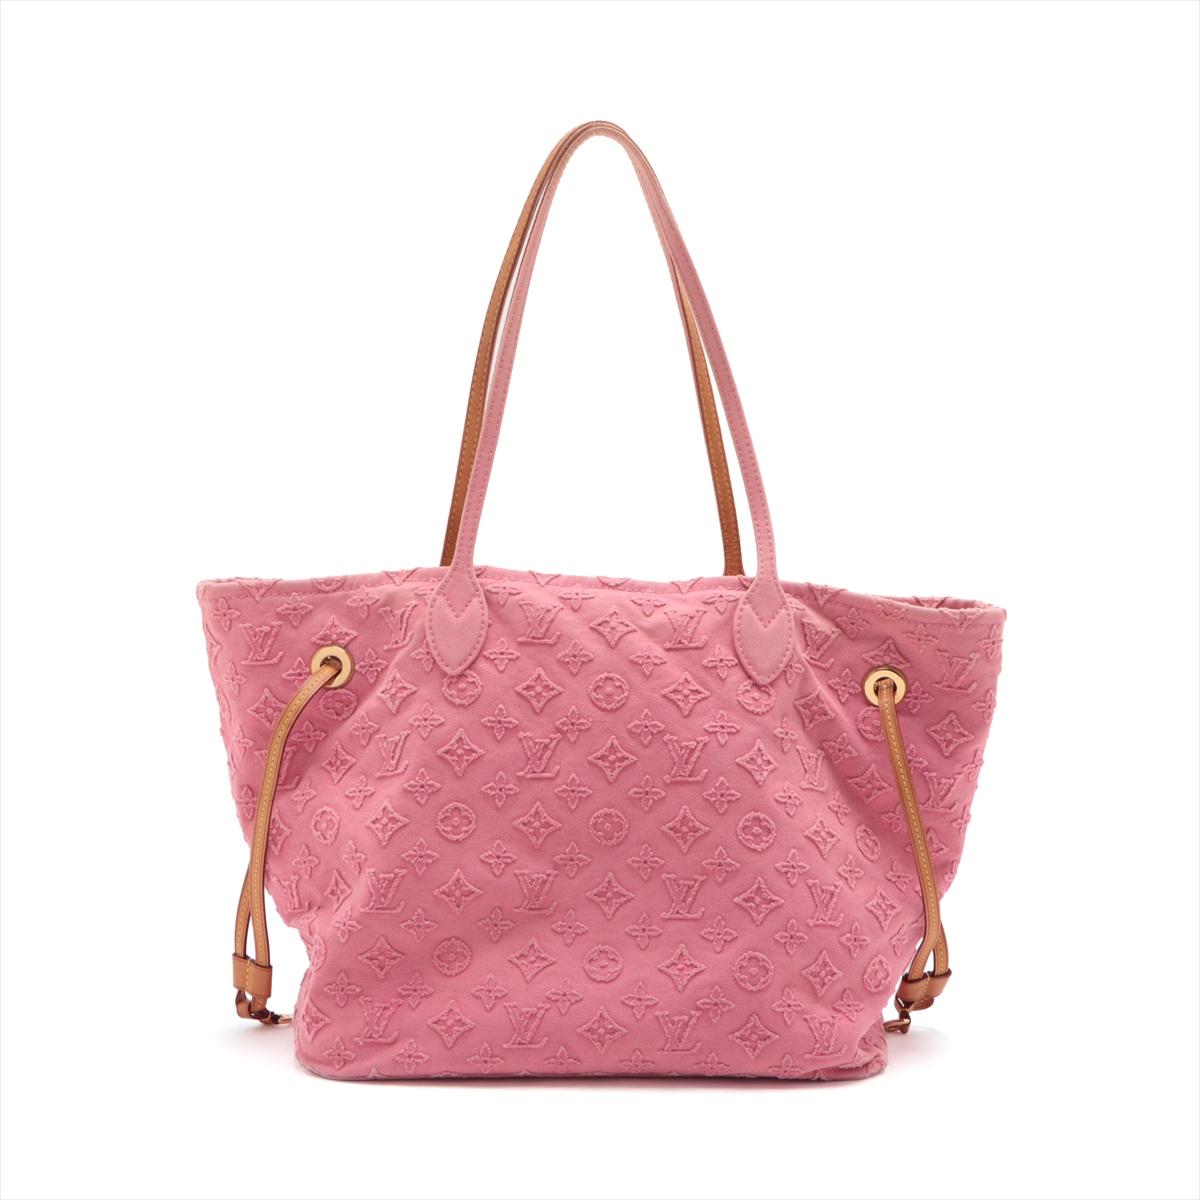 The Louis Vuitton Monogram Denim Applique Neverfull MM in Pink is a distinctive and fashionable variation of the classic Neverfull tote bag. The monogram canvas is complemented by a pink denim material, creating a fresh and contemporary look. It